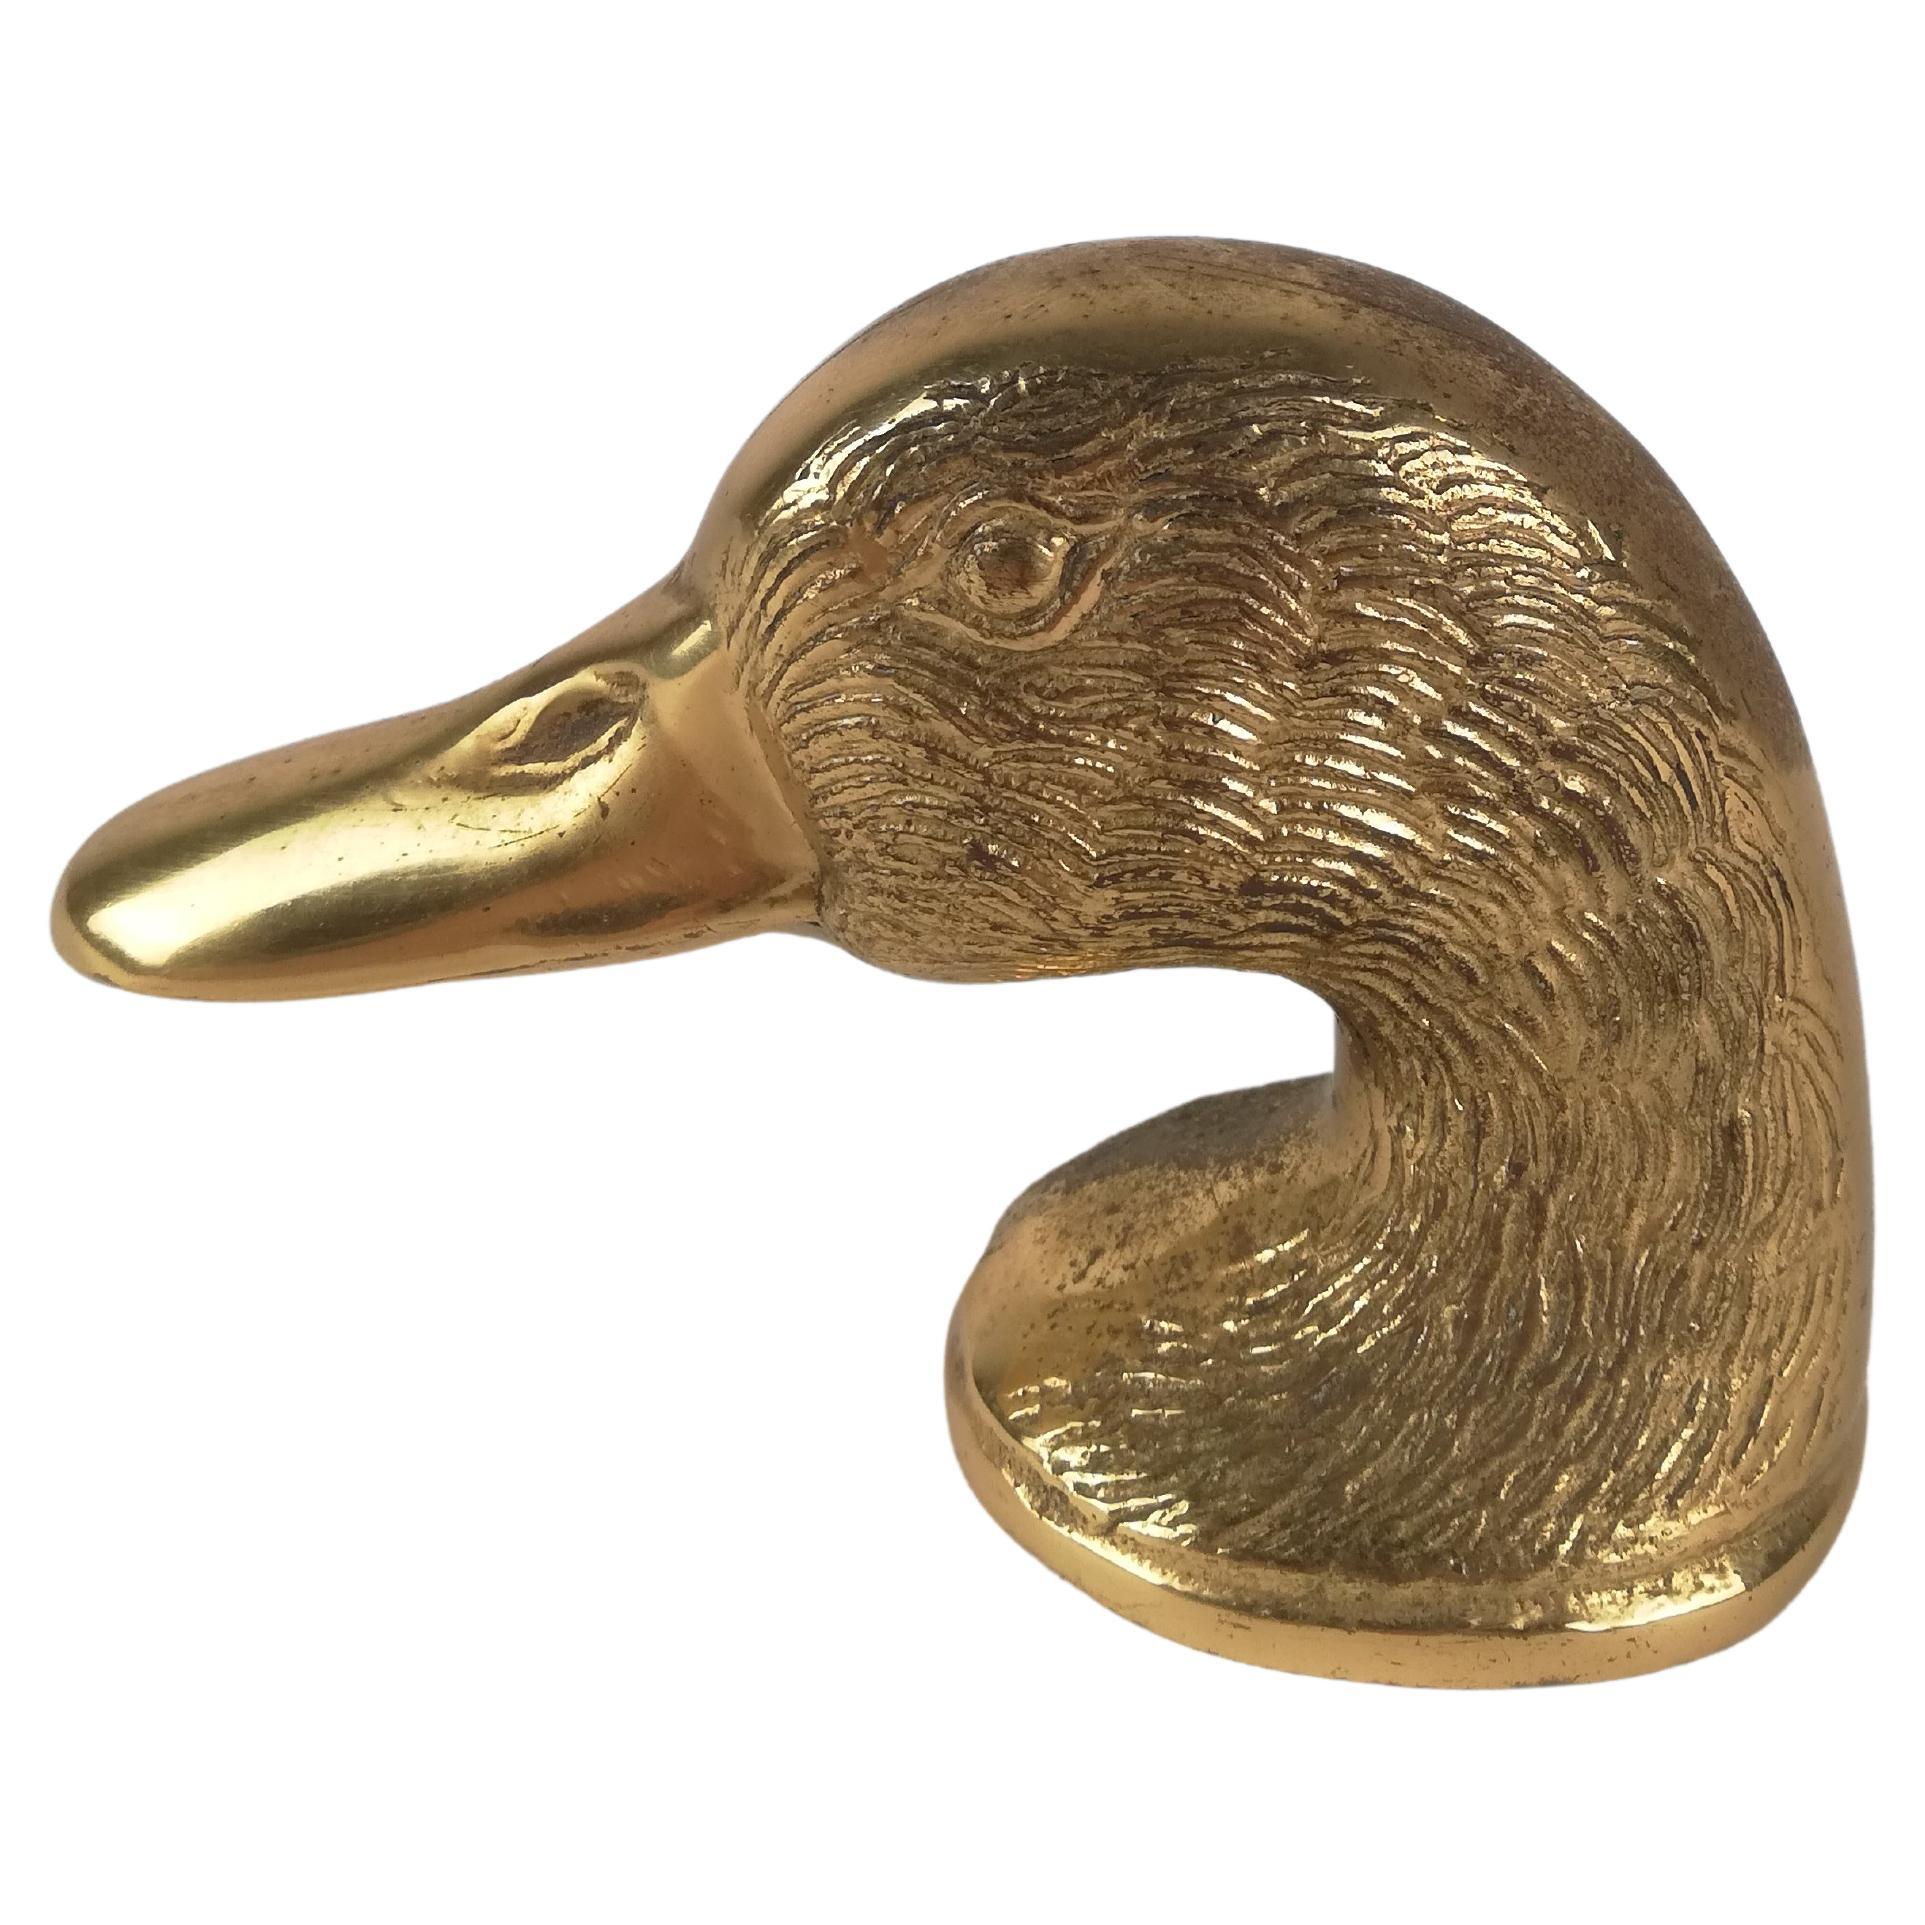 Vintage Animal's Head Bottle Opener in the Style of Gucci, Brass Sculptural Duck